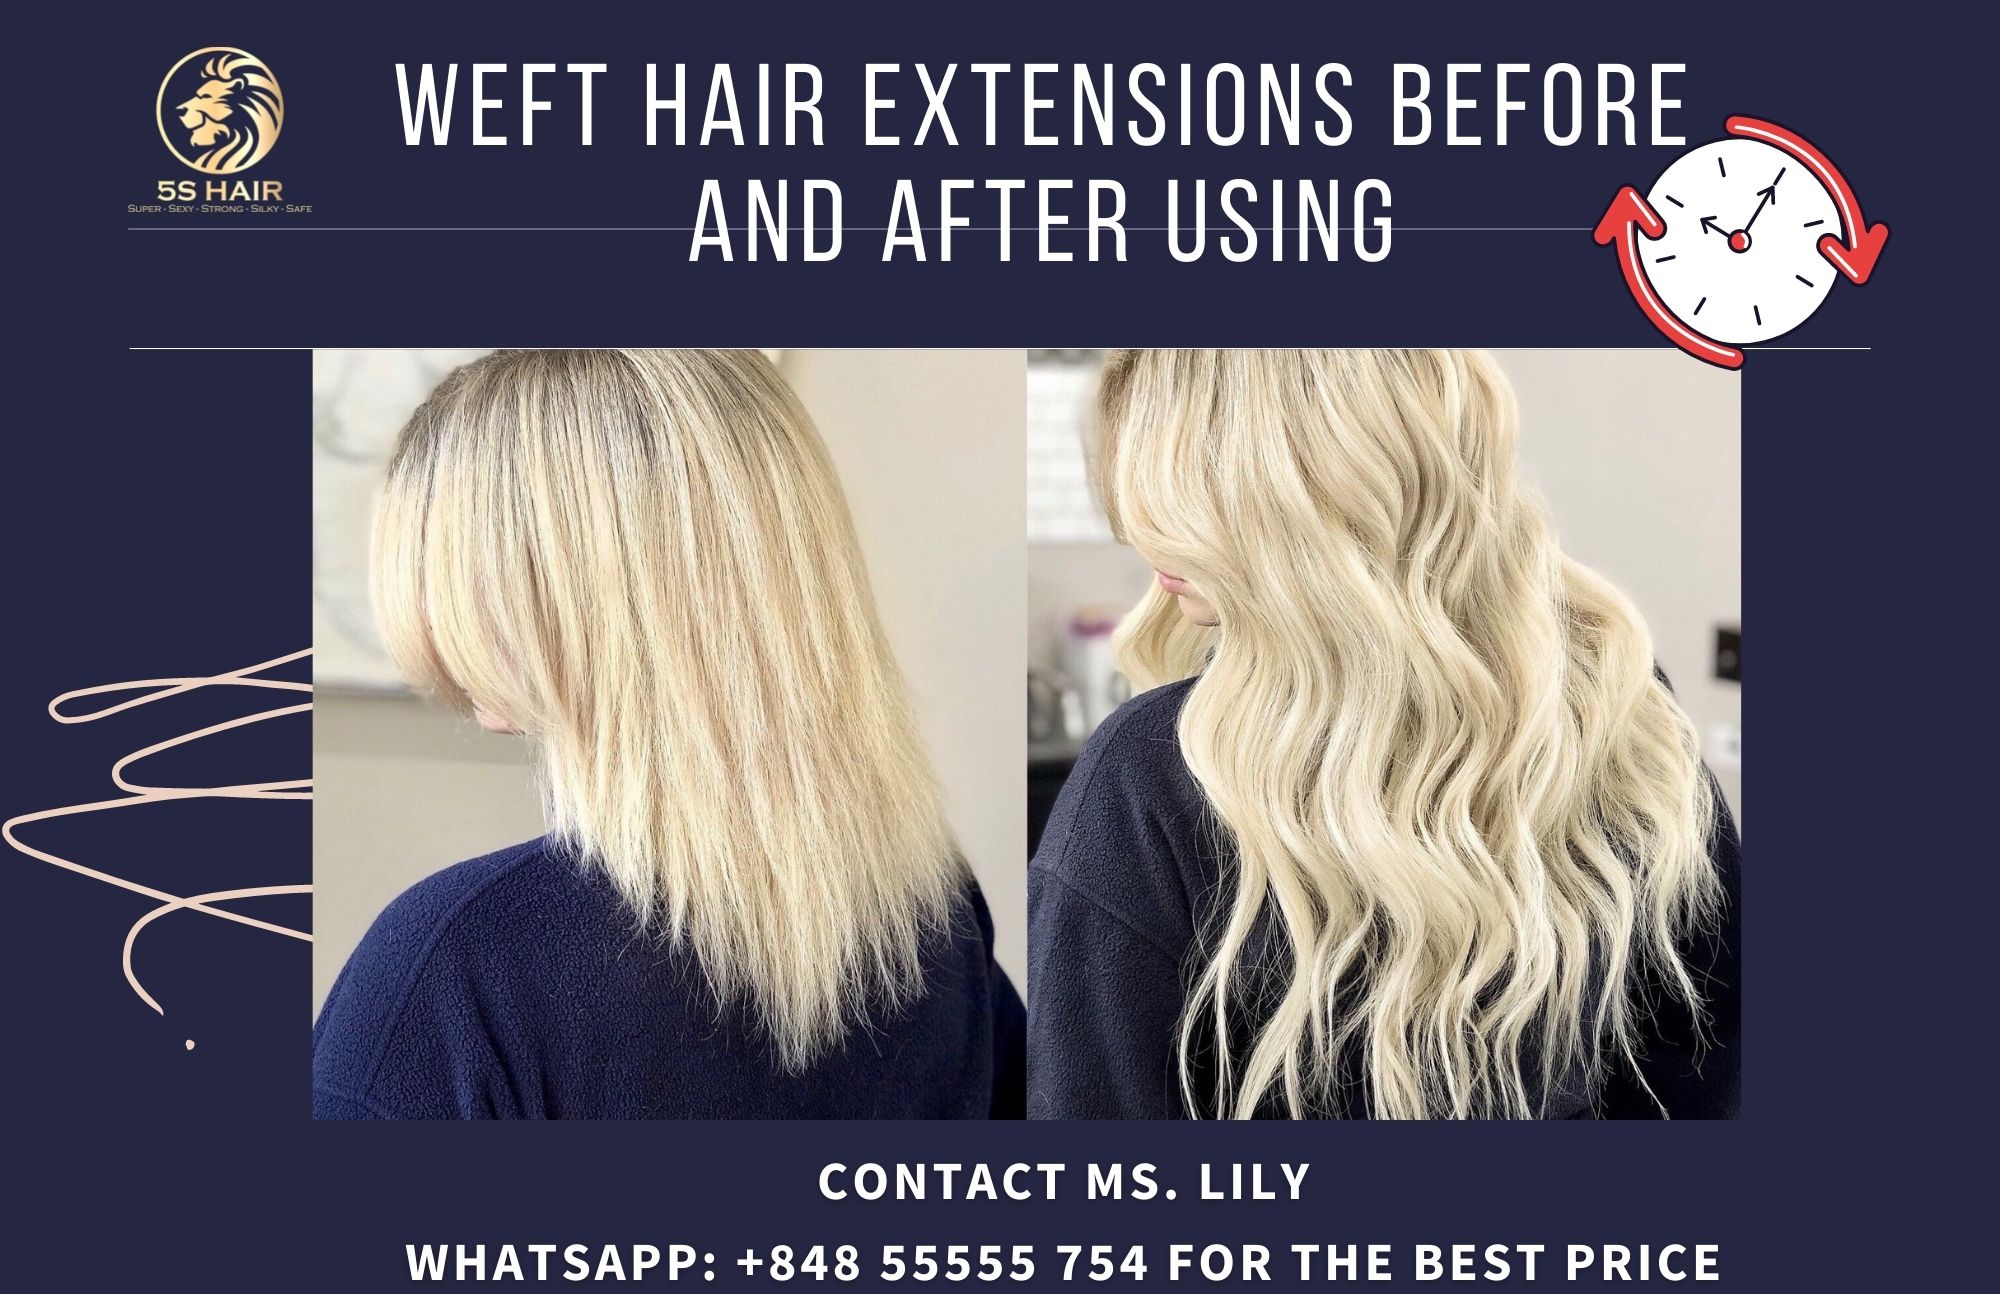 weft-hair-extension-products-never-go-fashion